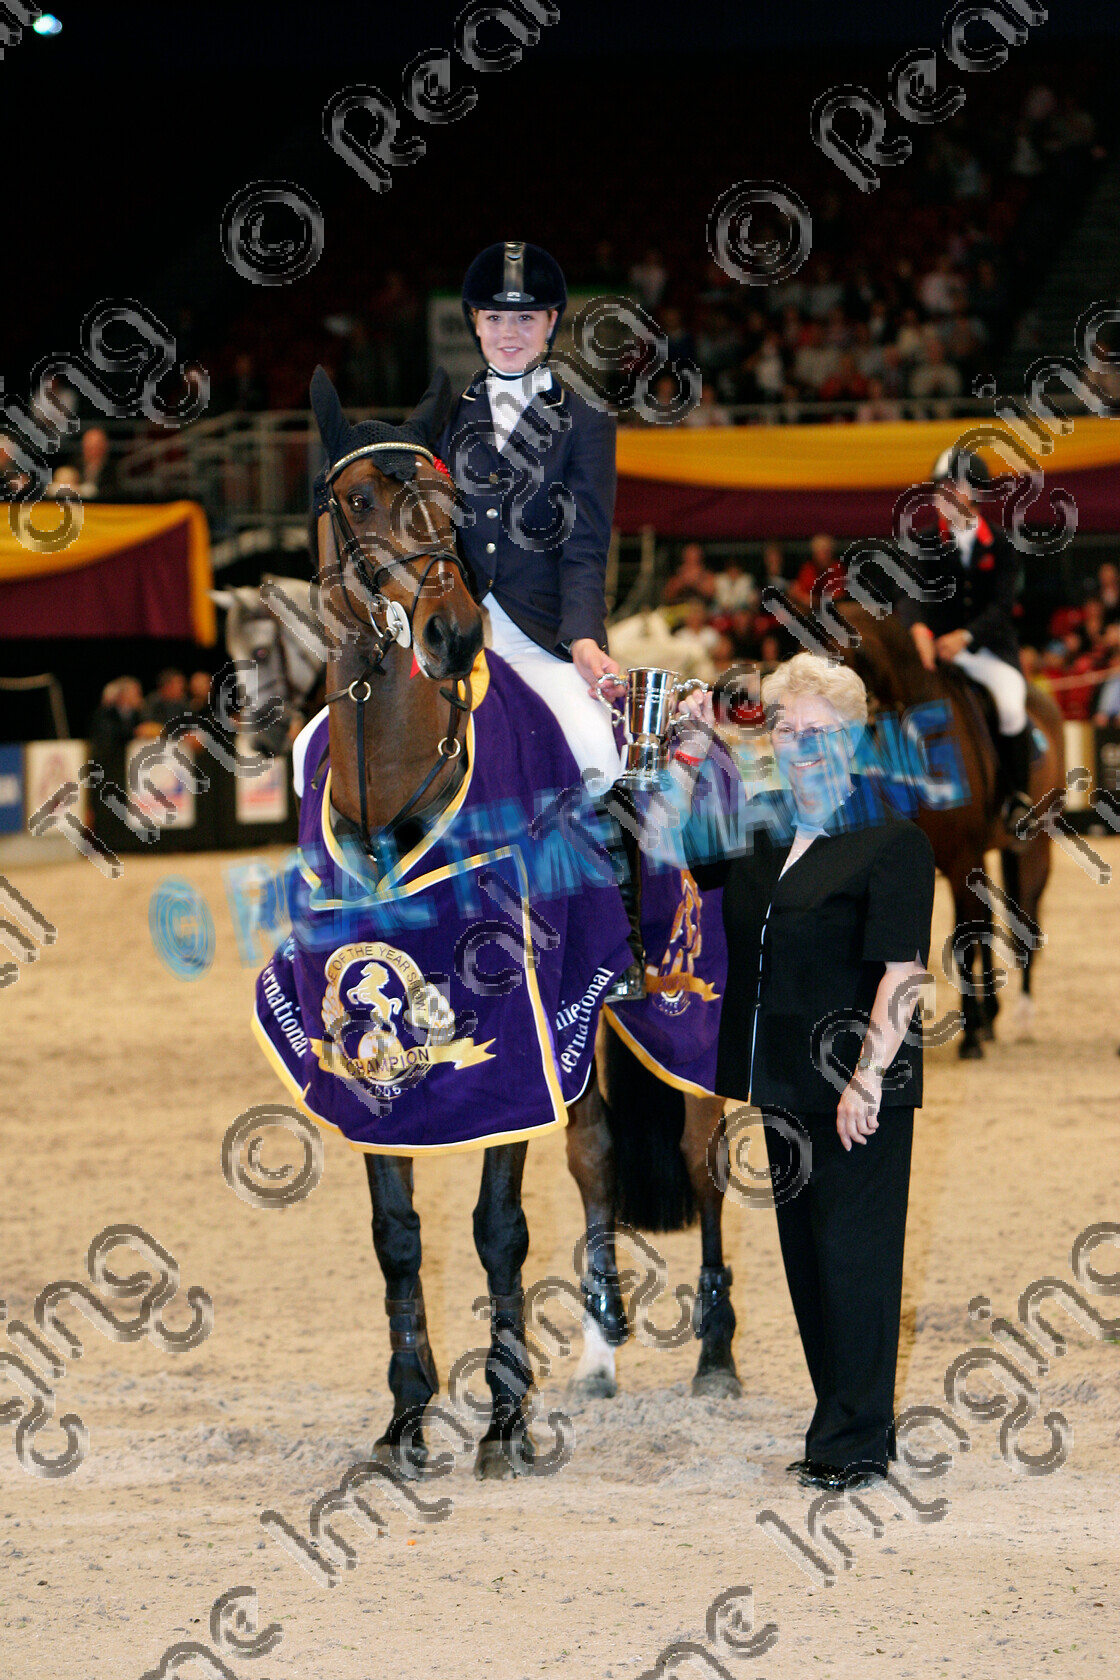 S05-64-13-002 
 HOYS 2005: The Young Riders Championship of Great Britain winner 
 Keywords: horse of the year show 2005 05 hoys wednesday 12 10 october 4 The Young Riders Championship of Great Britain winner 217 henri de here ellen whitaker showjumping showjumper standing presentation rug trophy rosette